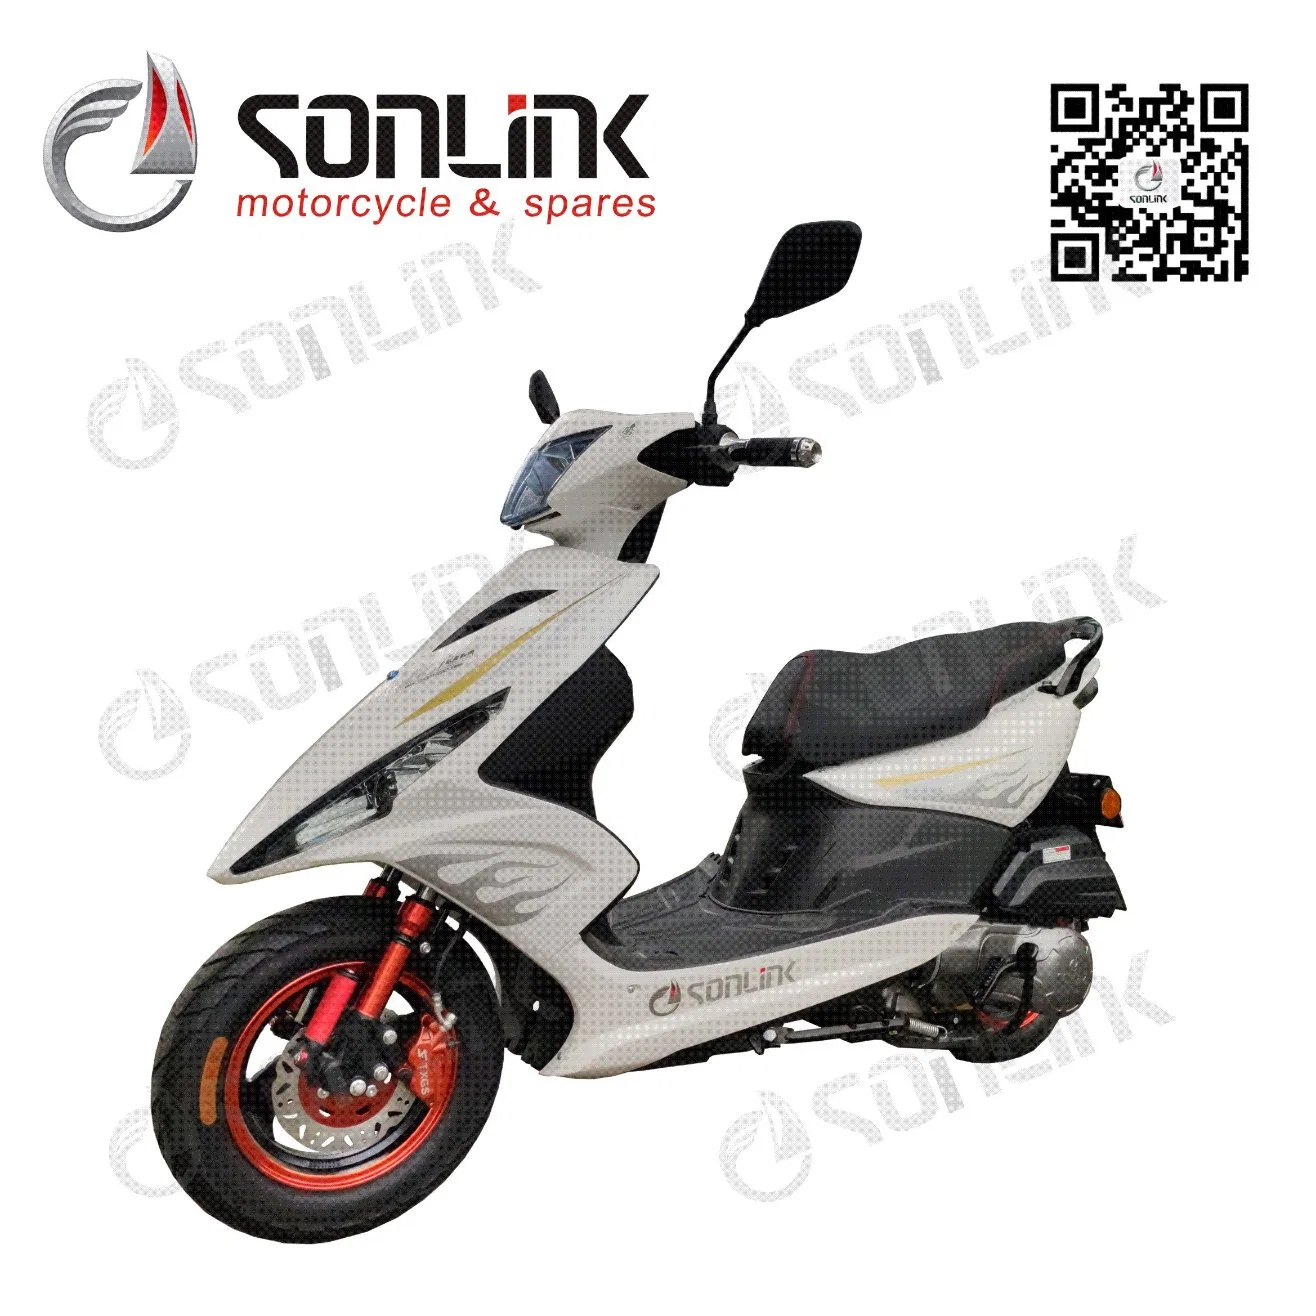 125 Cc Gasoline Scooter / 50cc Scooter / 250cc Dirt Bike / Motorbike / Scooter / Gas Scooter / 49cc Dirt Bike / 50cc Motor Scooter